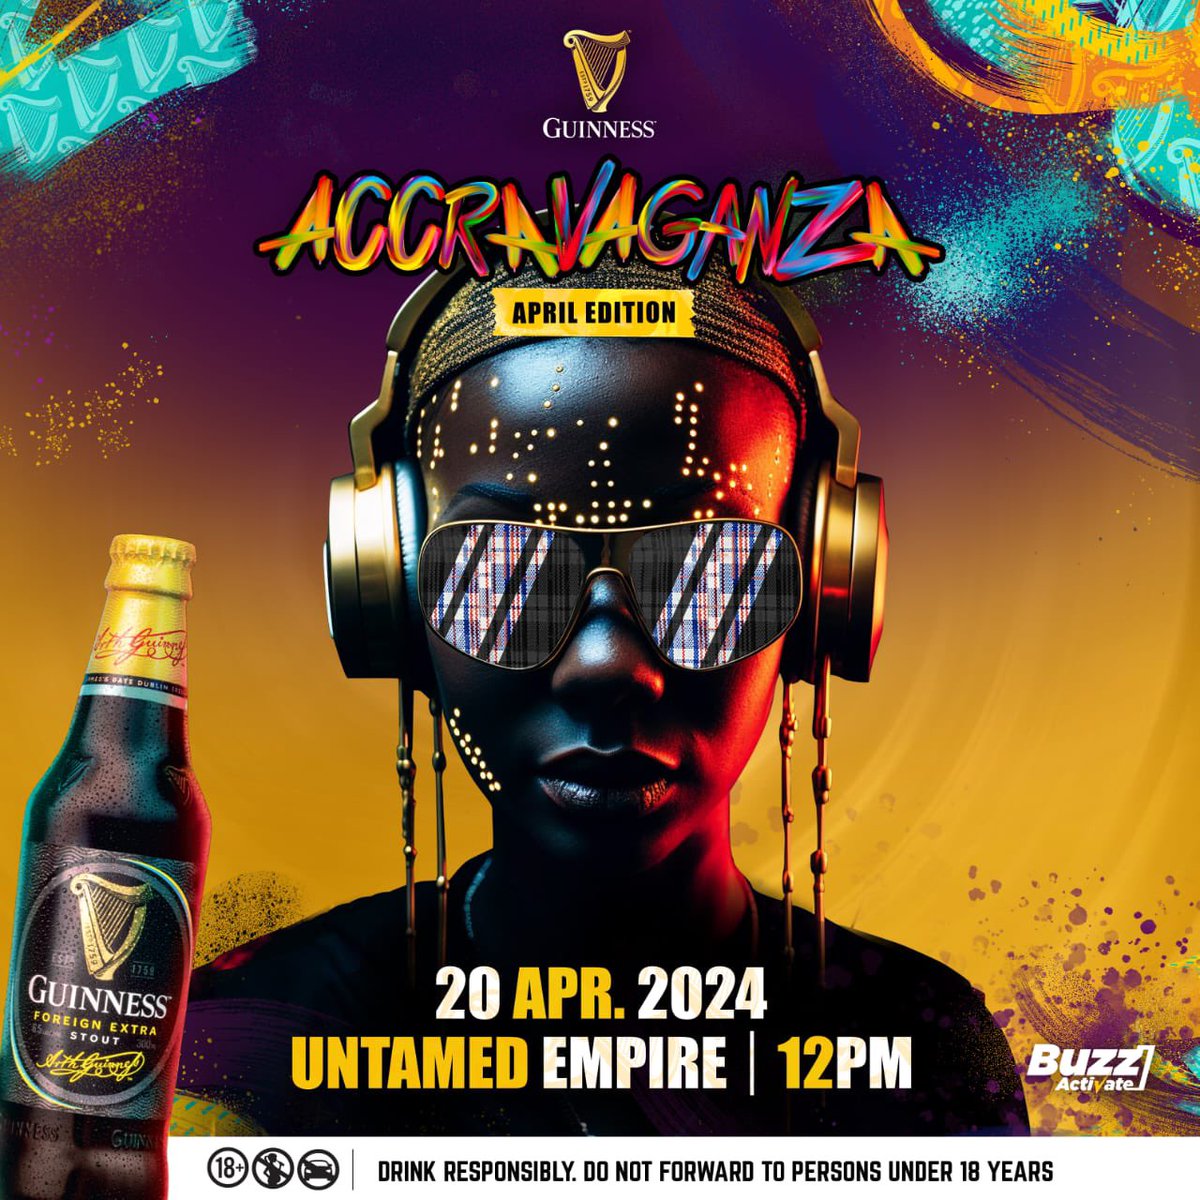 Saturday is for good times and great company!Celebrate with us at the Guinness Accravaganza, Untamed Empire.

#GuinnessAccravaganza